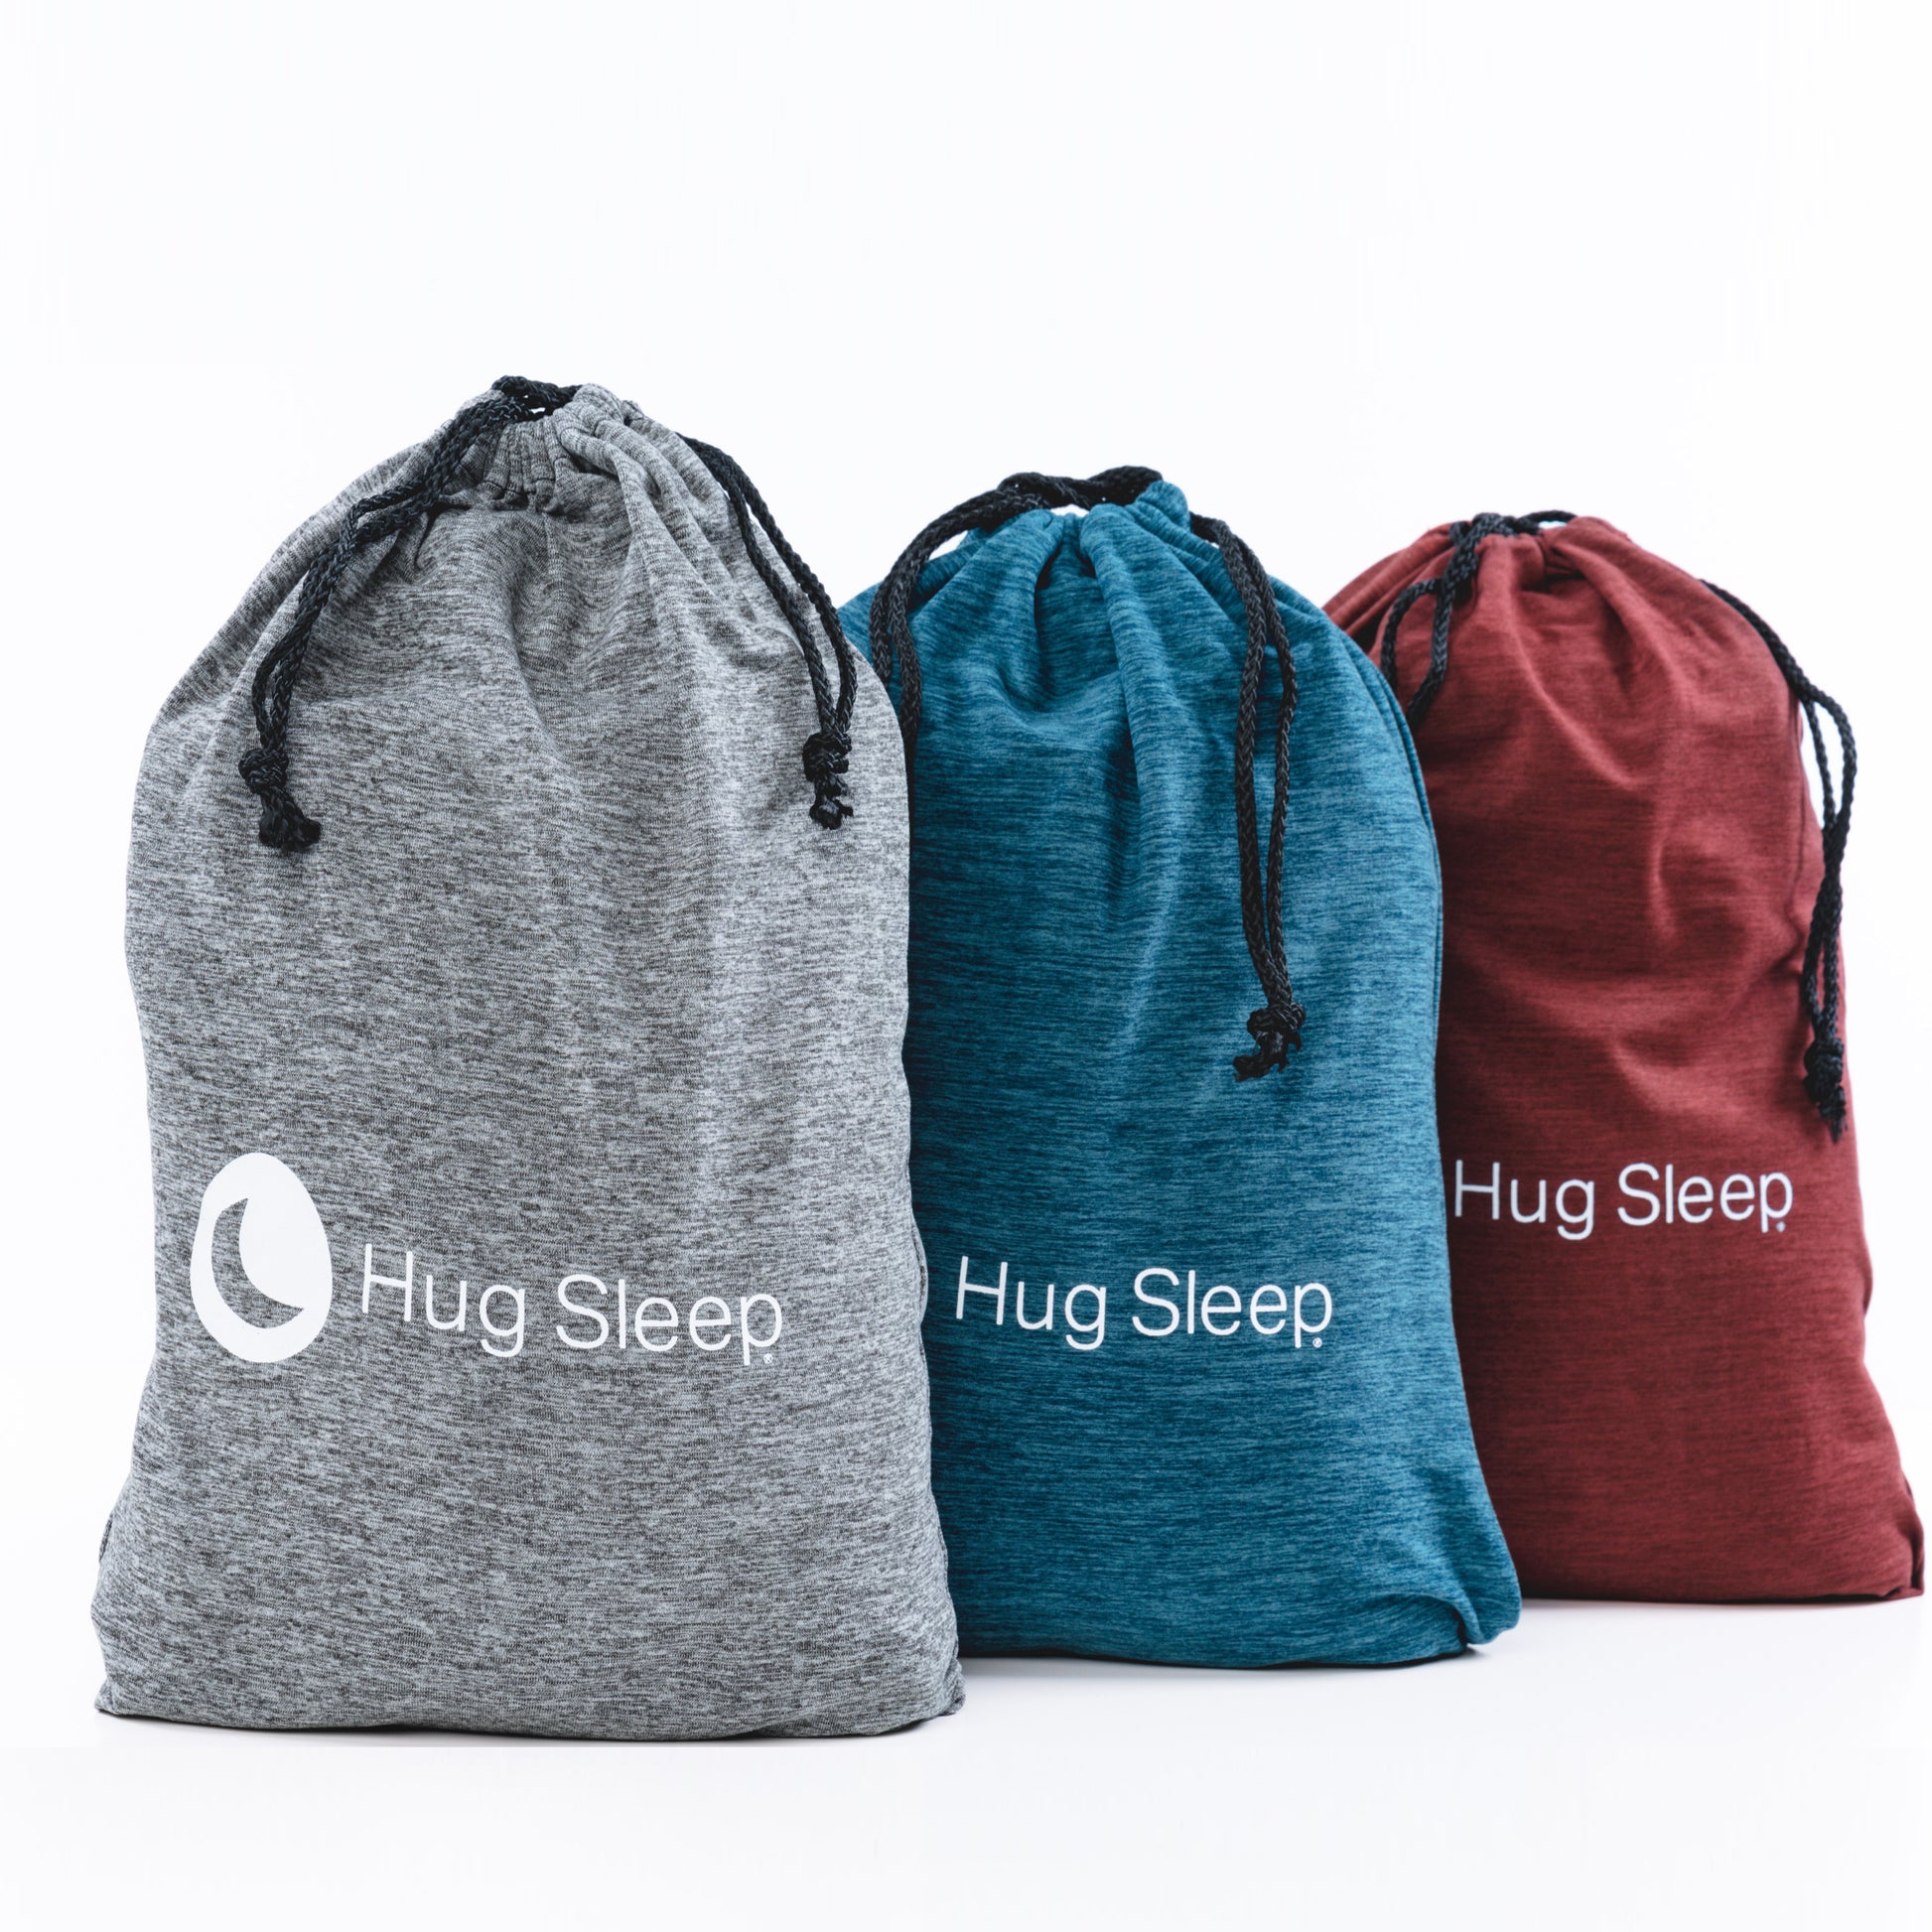 image of three hug stretch™ bags in three colors (grey, teal and ruby)